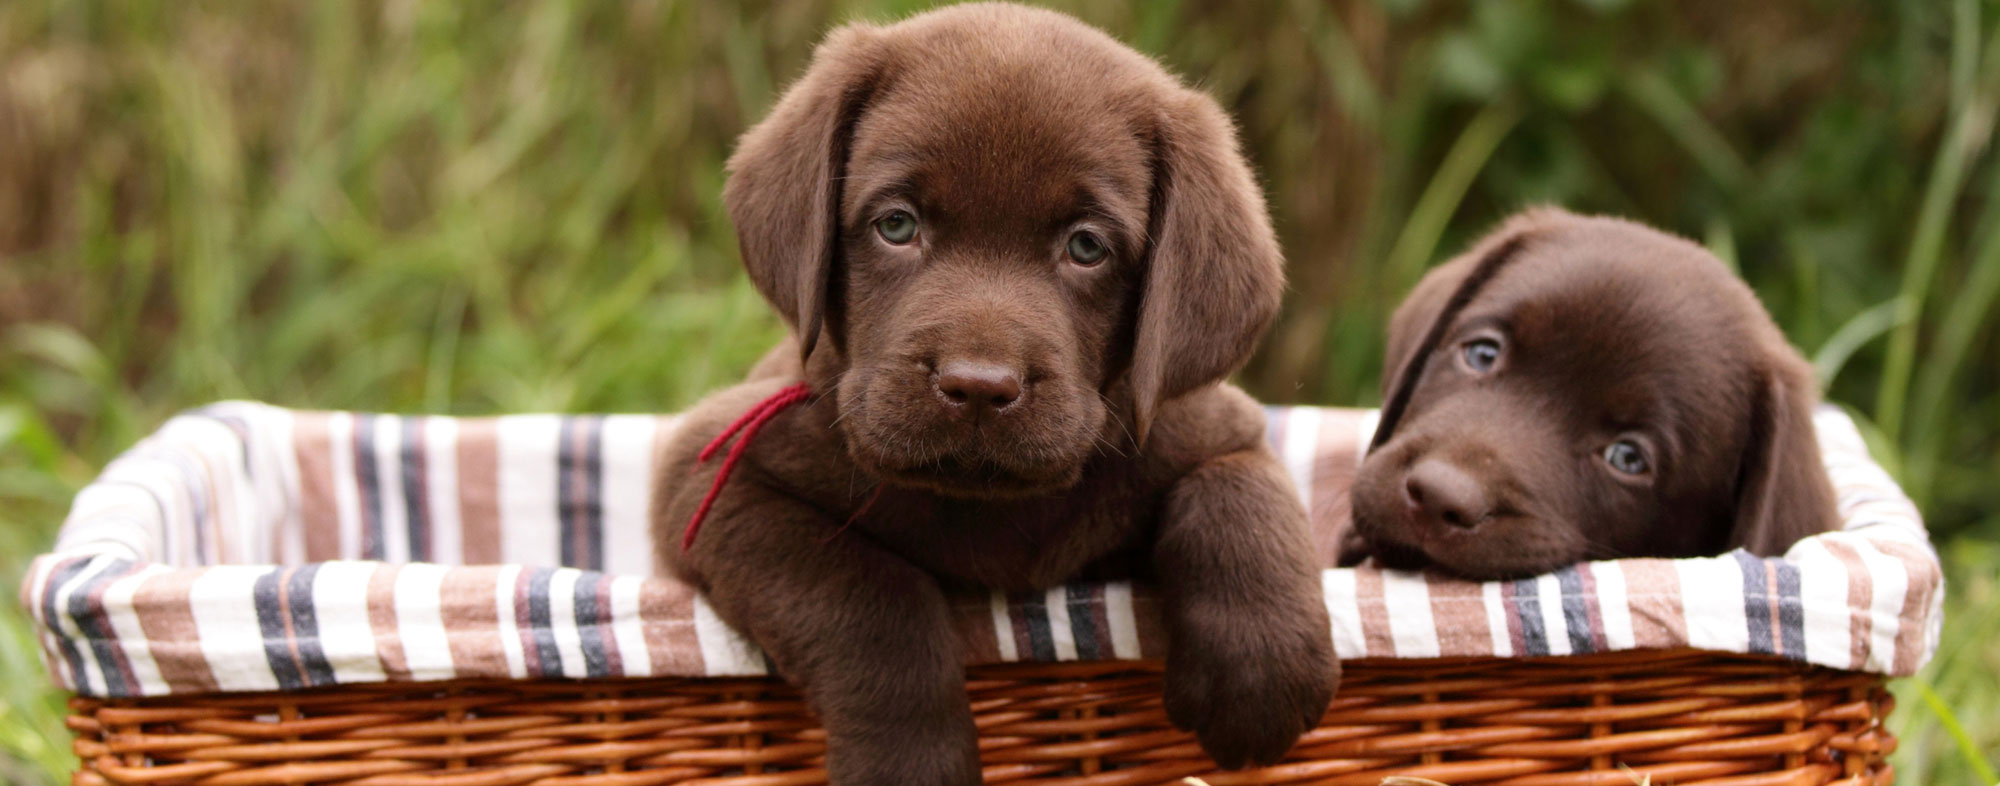 If your puppies enjoy the outdoors, give them adventurous dog names